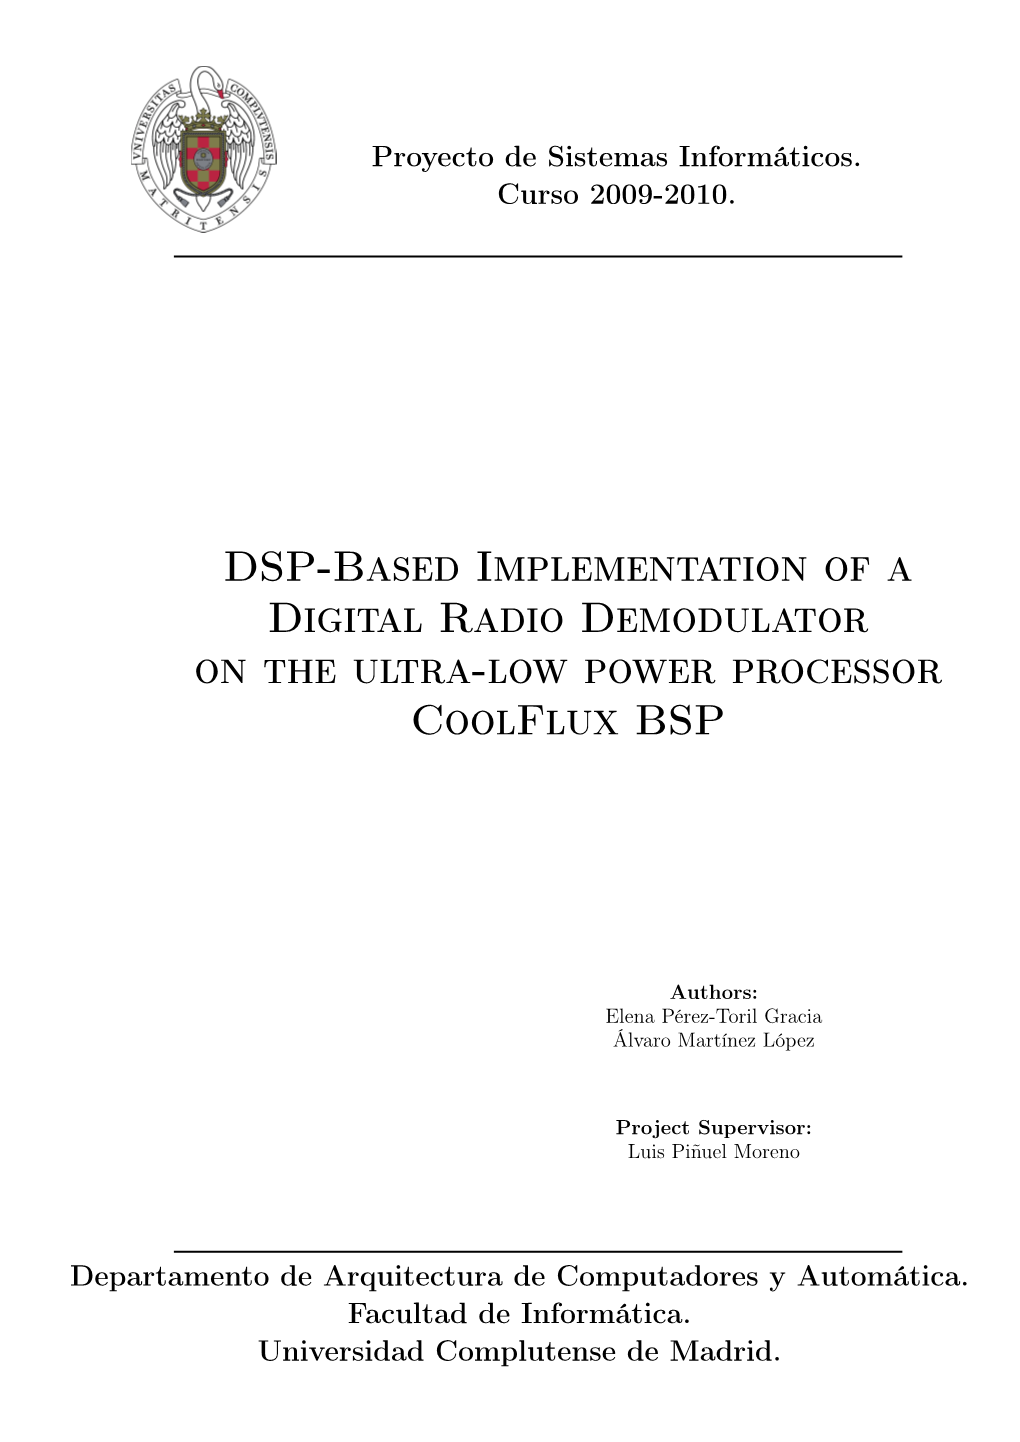 DSP-Based Implementation of a Digital Radio Demodulator on the Ultra-Low Power Processor Coolflux BSP